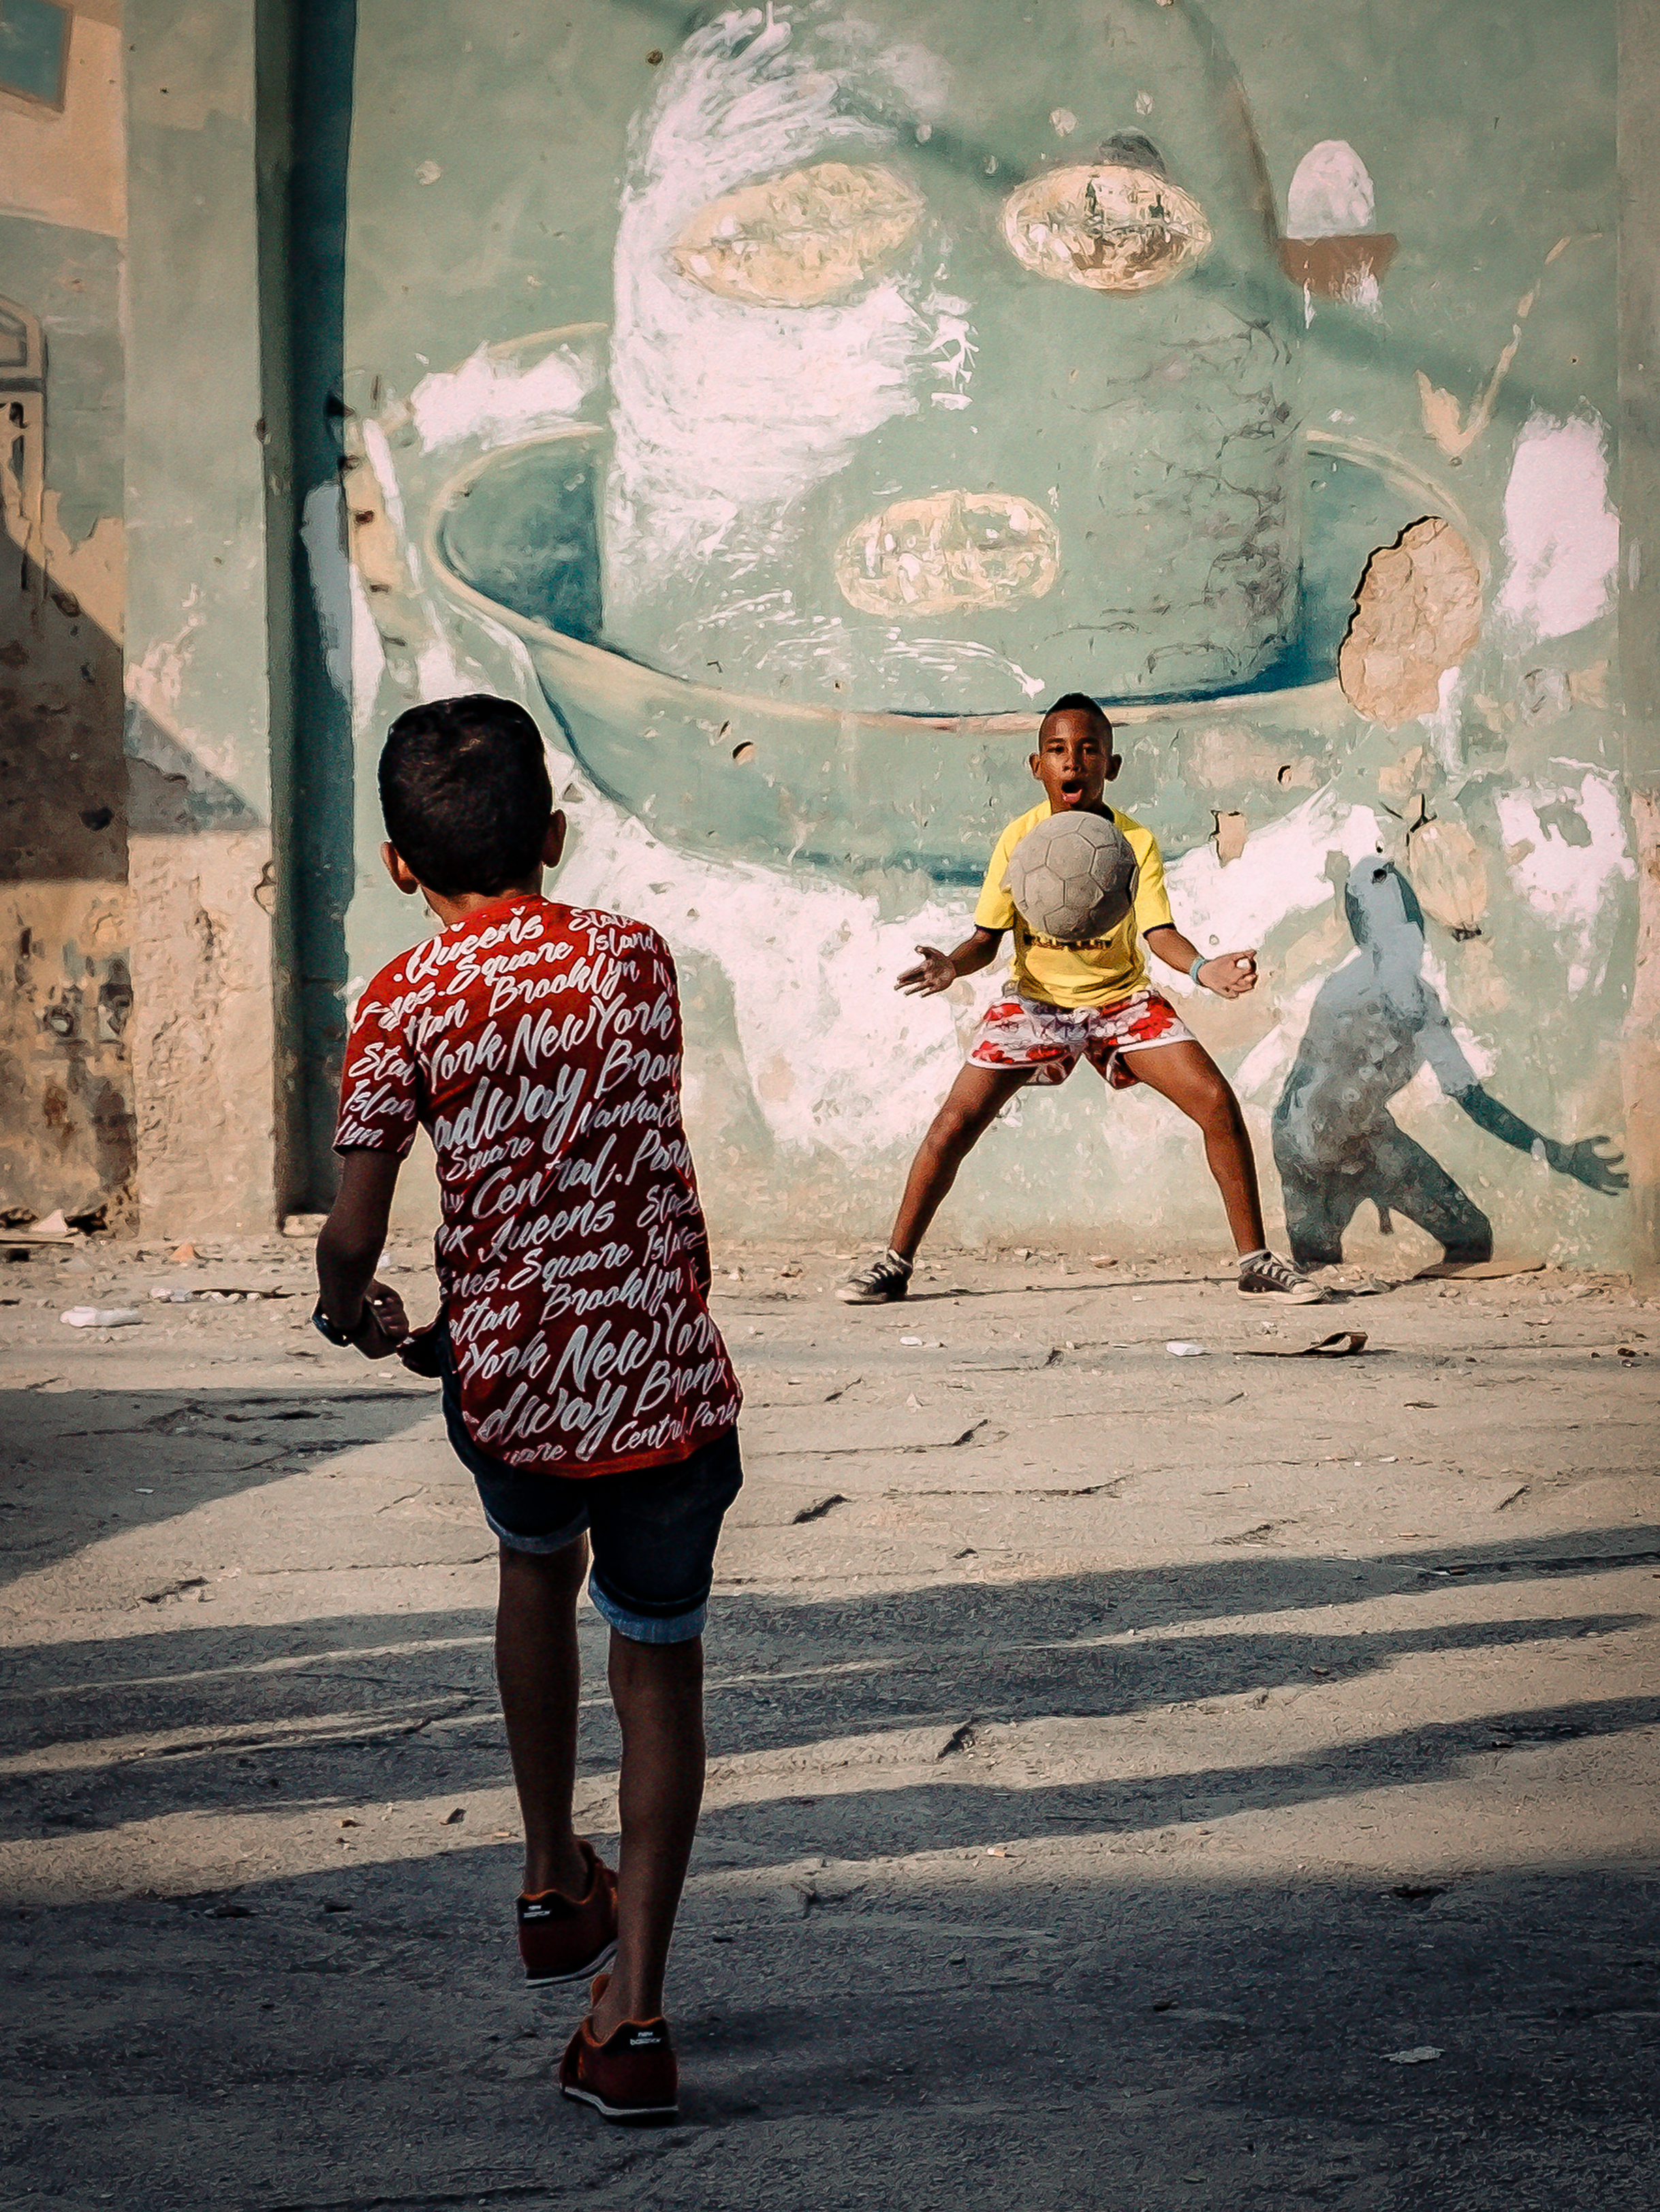 Children play football in the street in Havana in this photograph by Andreas Bauer